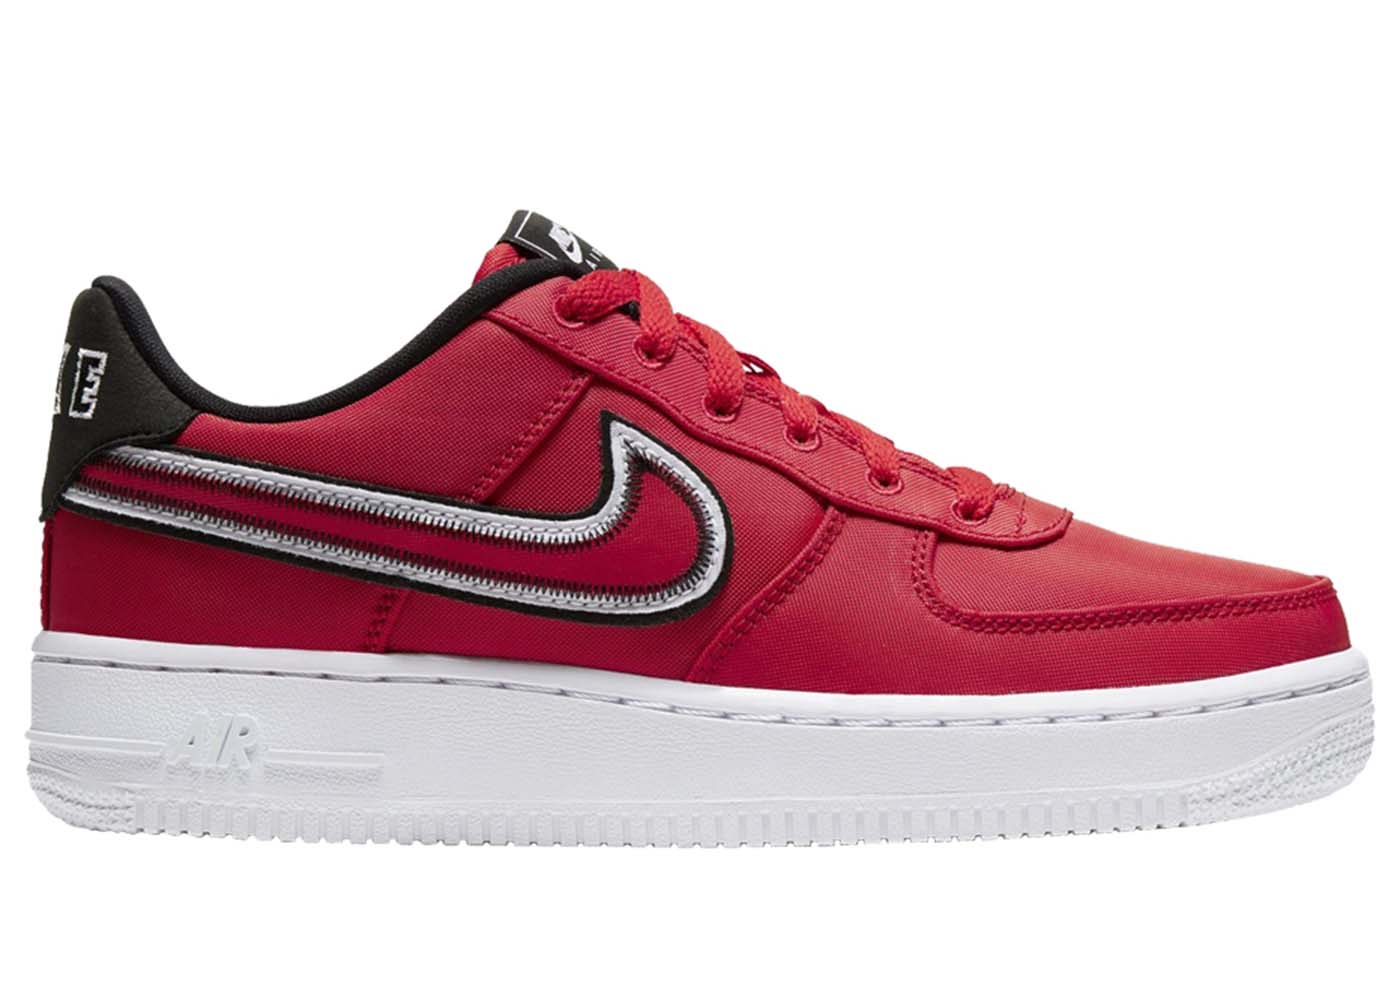 Nike Air Force 1 Low LV8 University Red White (GS)